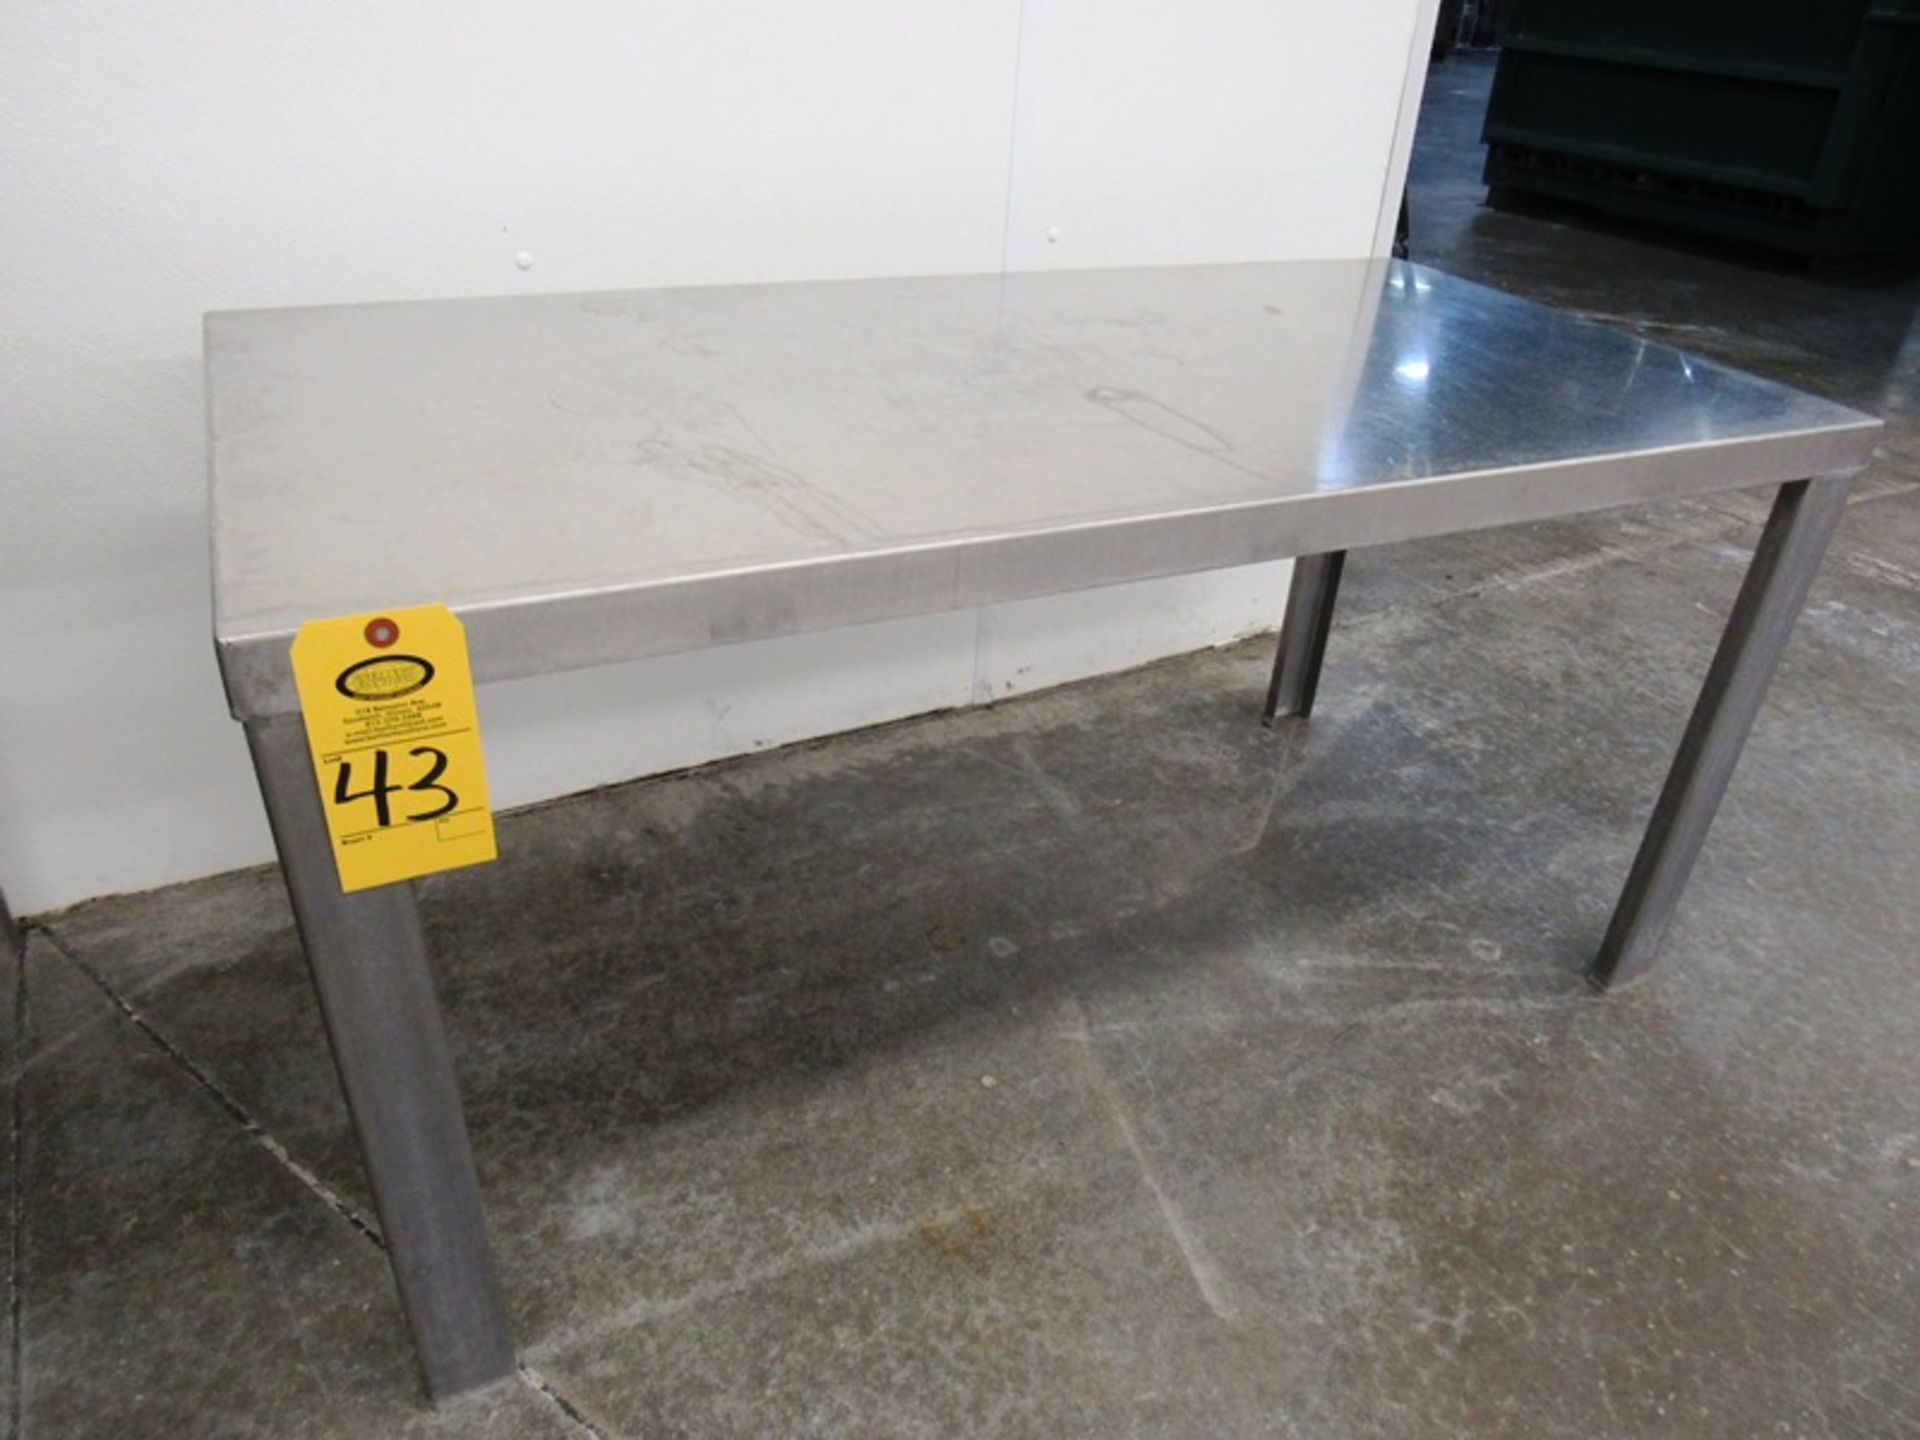 Stainless Steel Table, 43" W X 49" L X 24" T (Removal Begins July 5th) Loading Fee $35 Rigger: